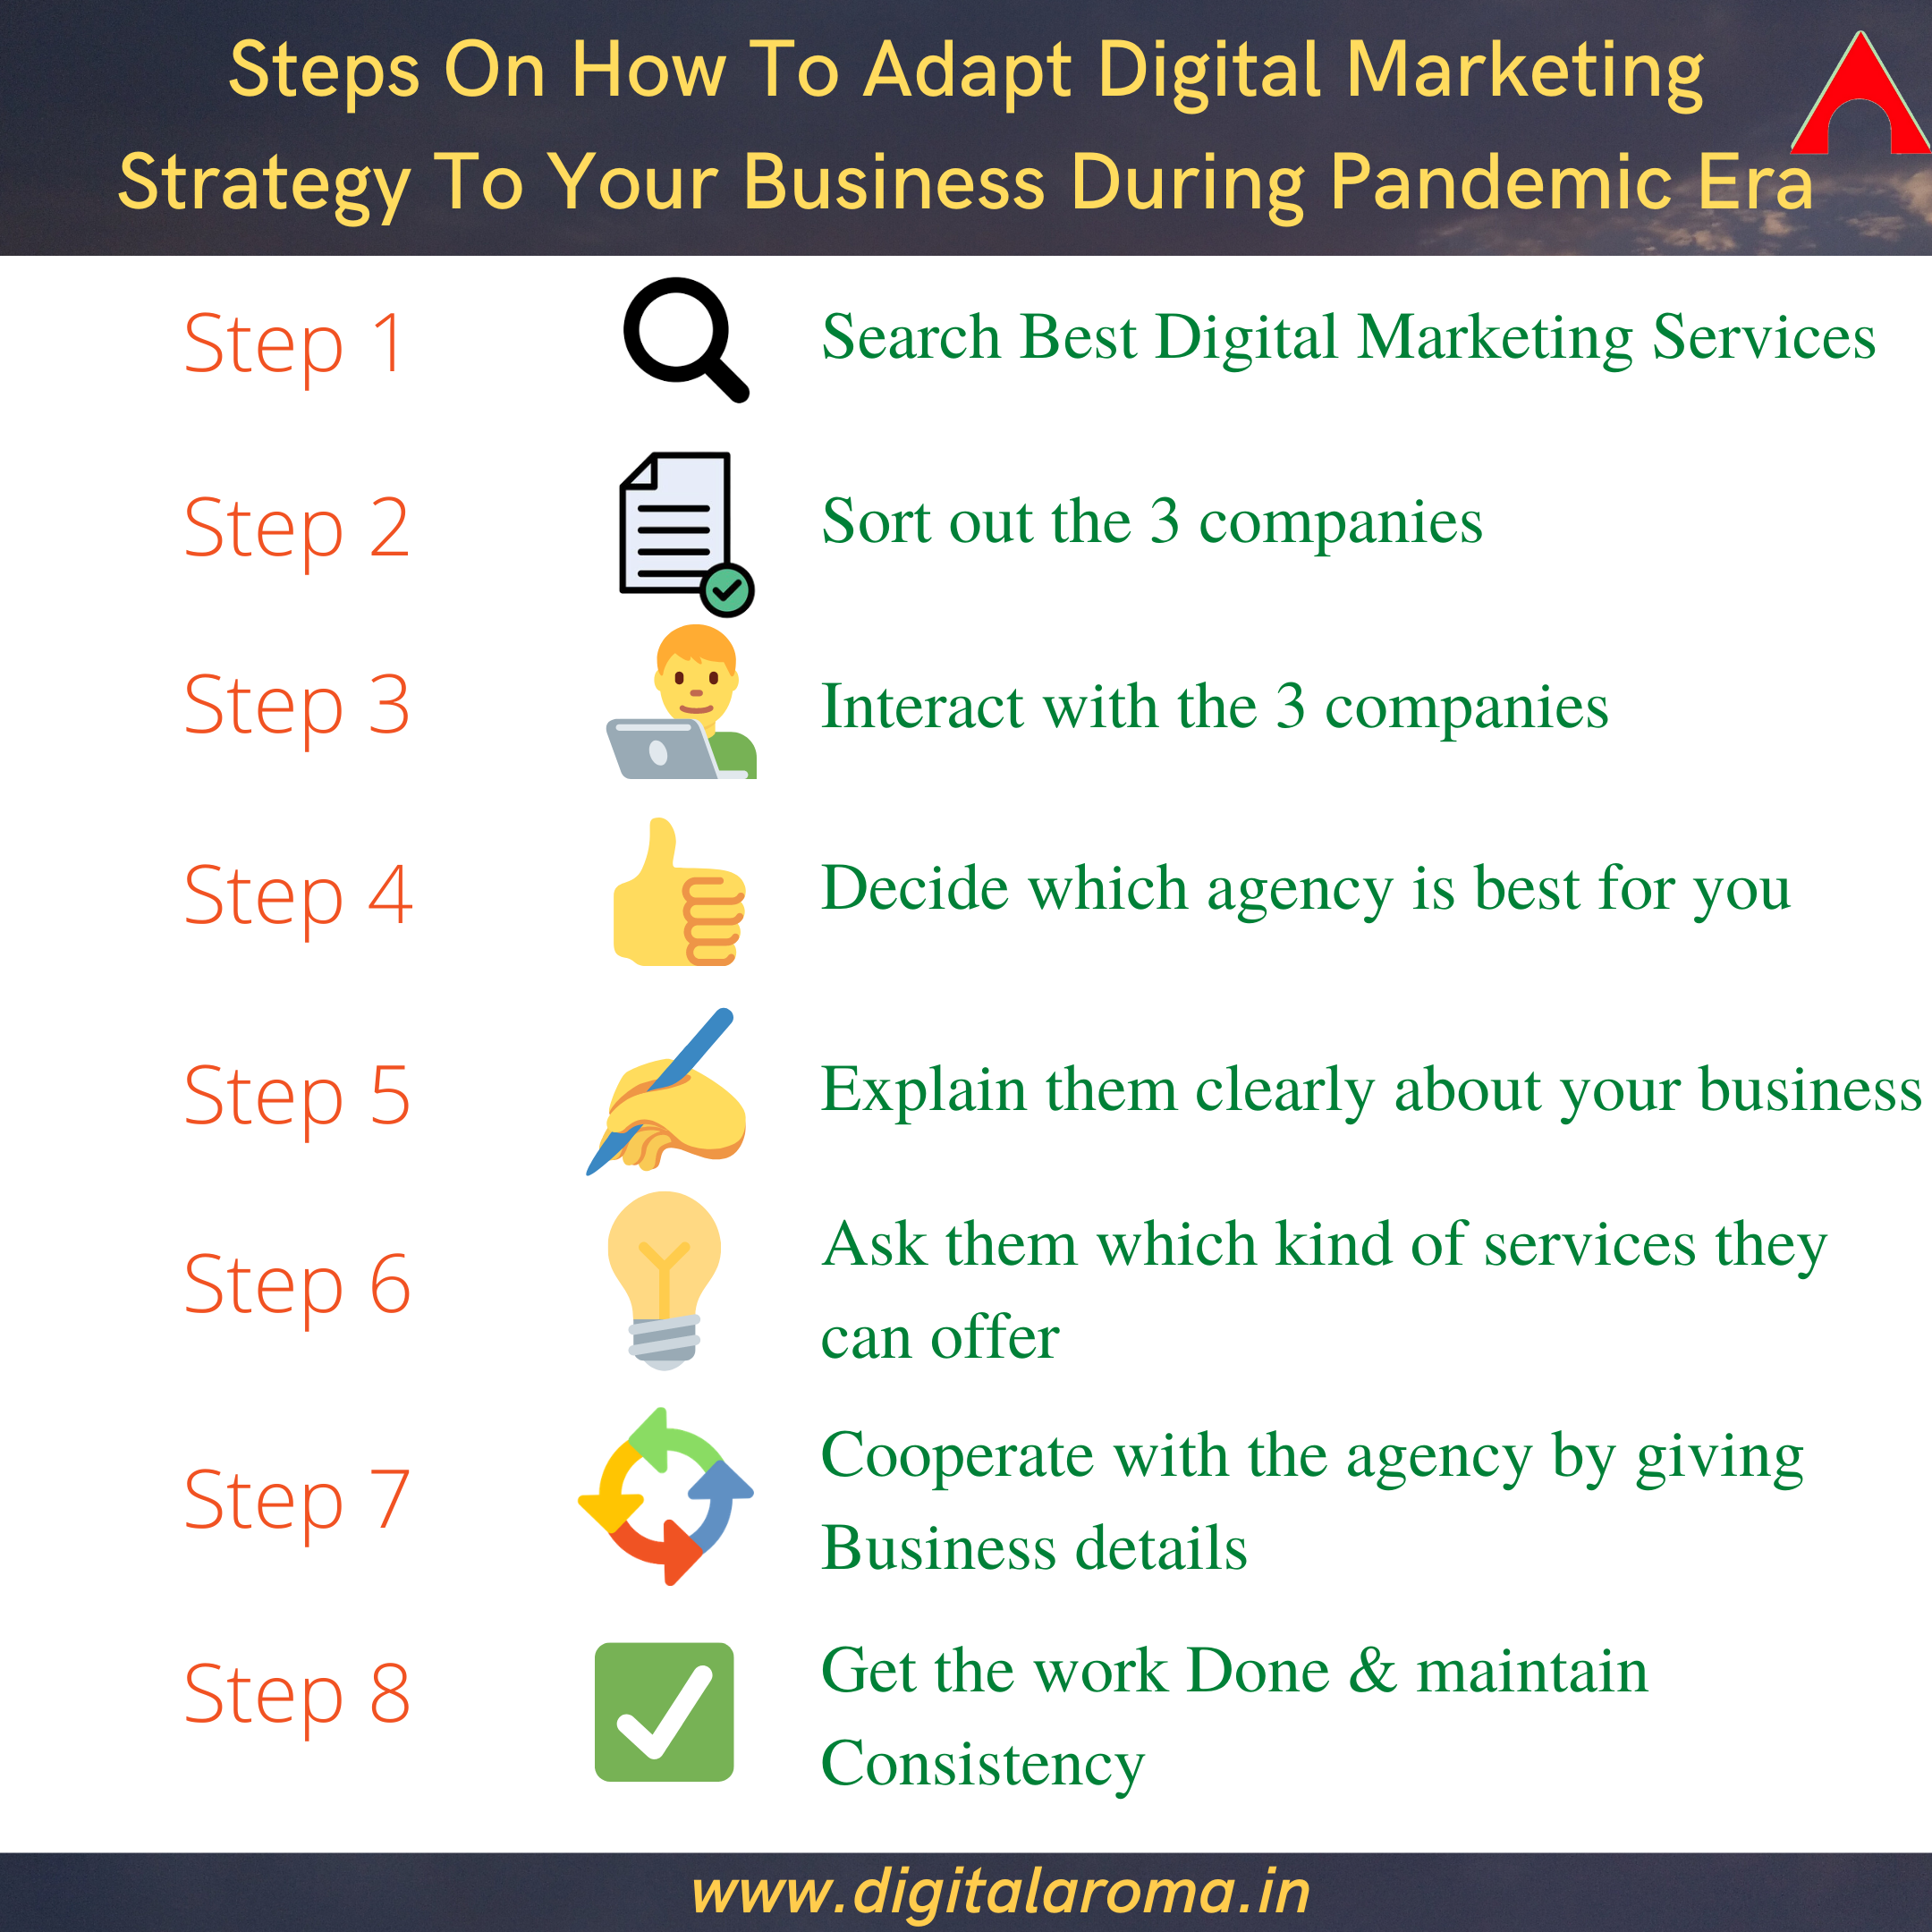 how-to-adopt-digital-marketing-strategy-to-your-business-during-pandemic-era-1